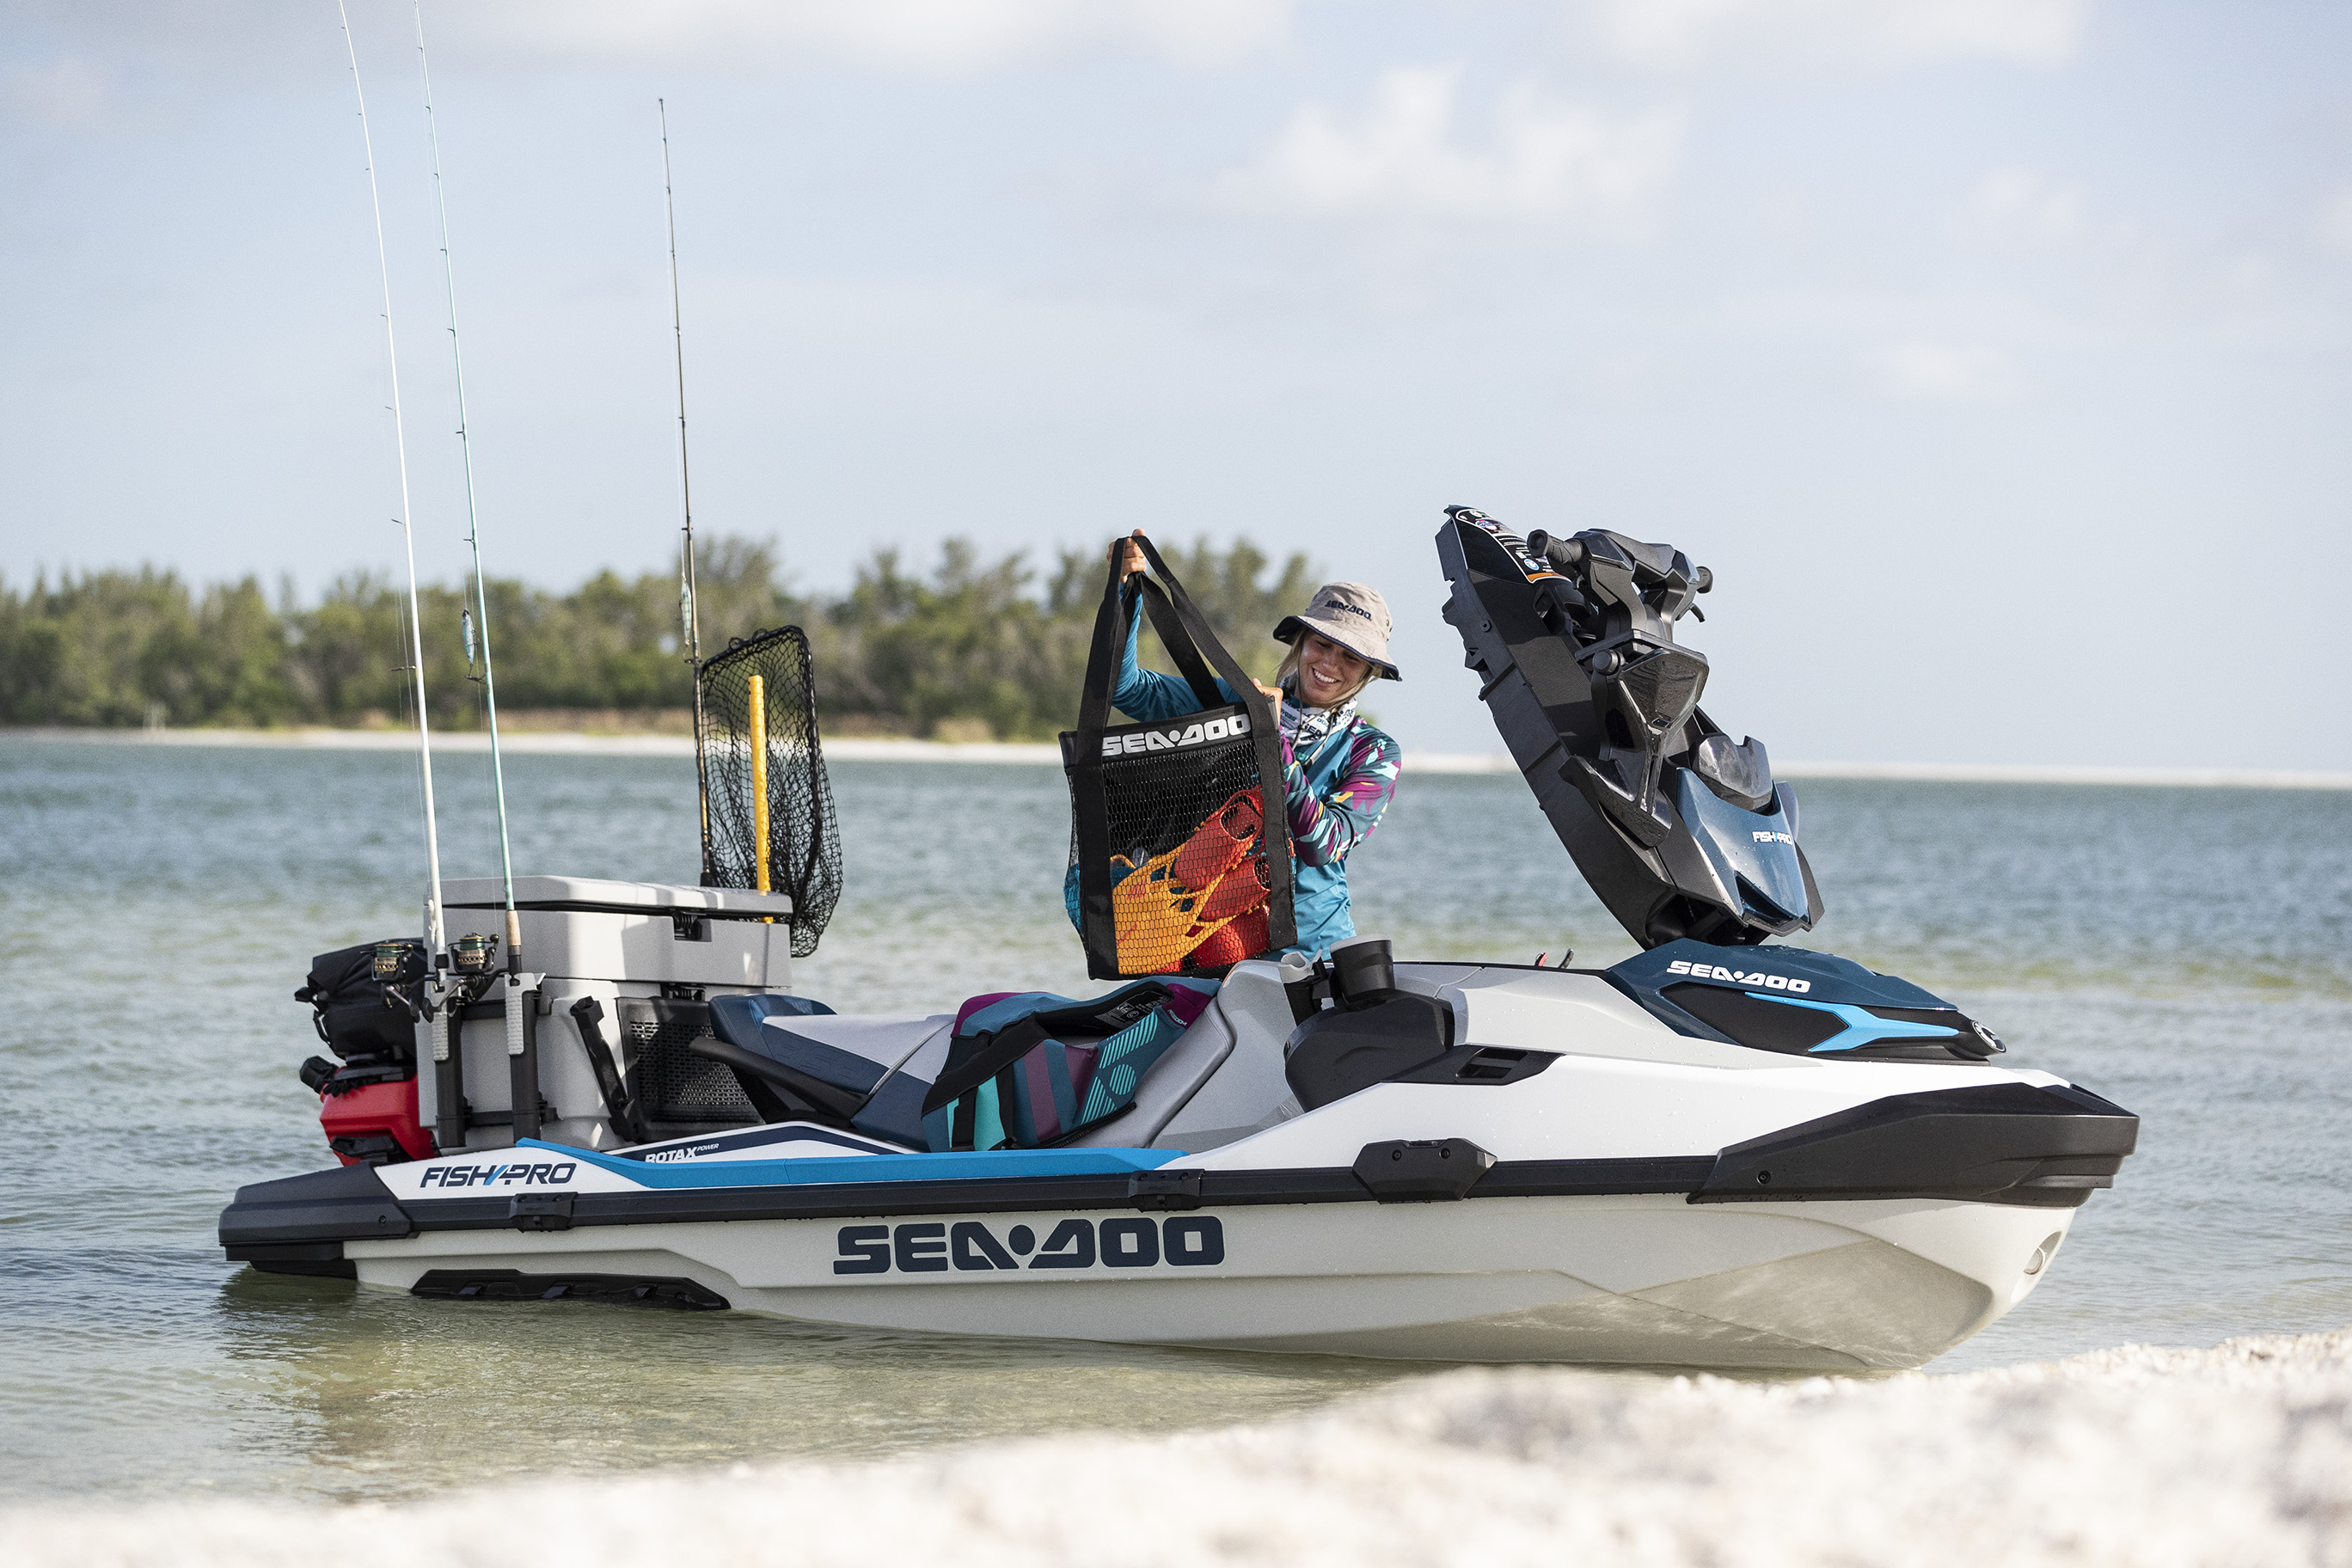 2021 WATERCRAFT OF THE YEAR: SEA-DOO RXP-X RS 300 & FISH PRO 170